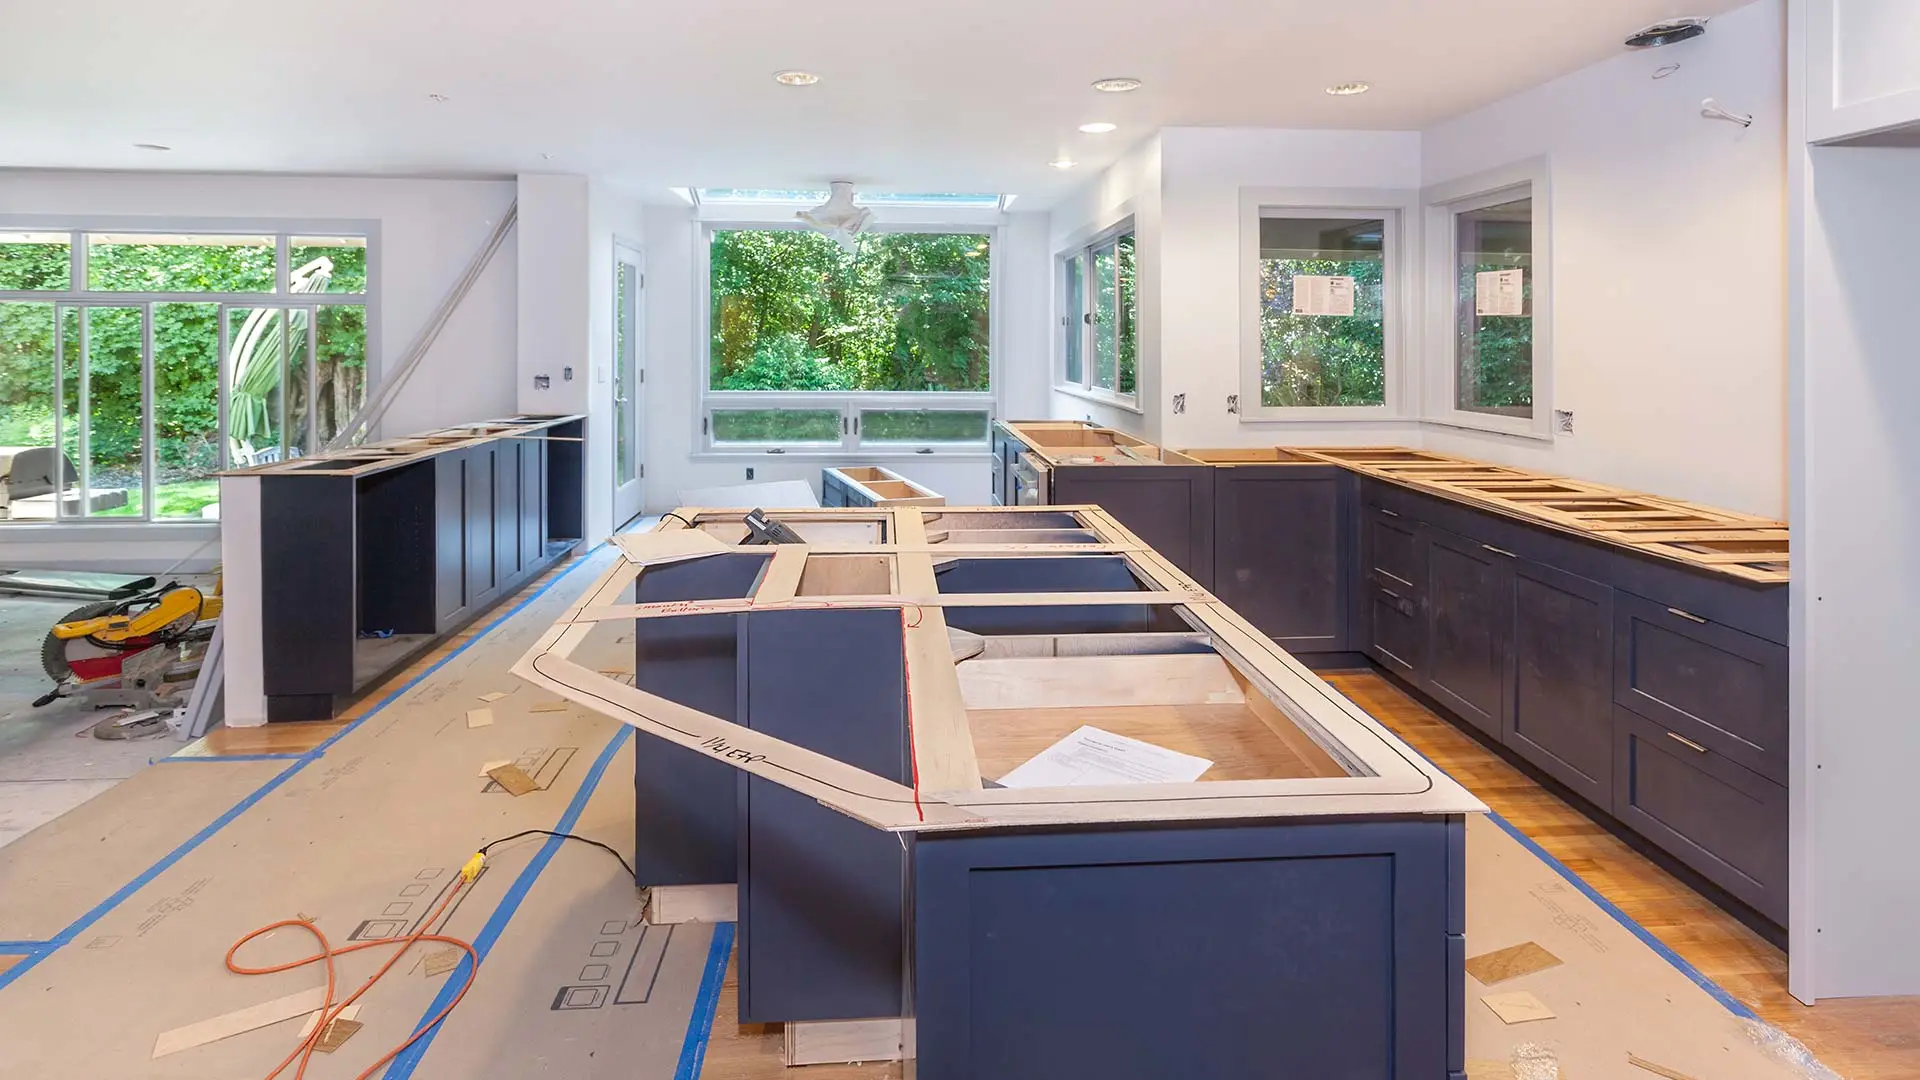 How a DIY Kitchen Remodel Can Go Horribly Wrong